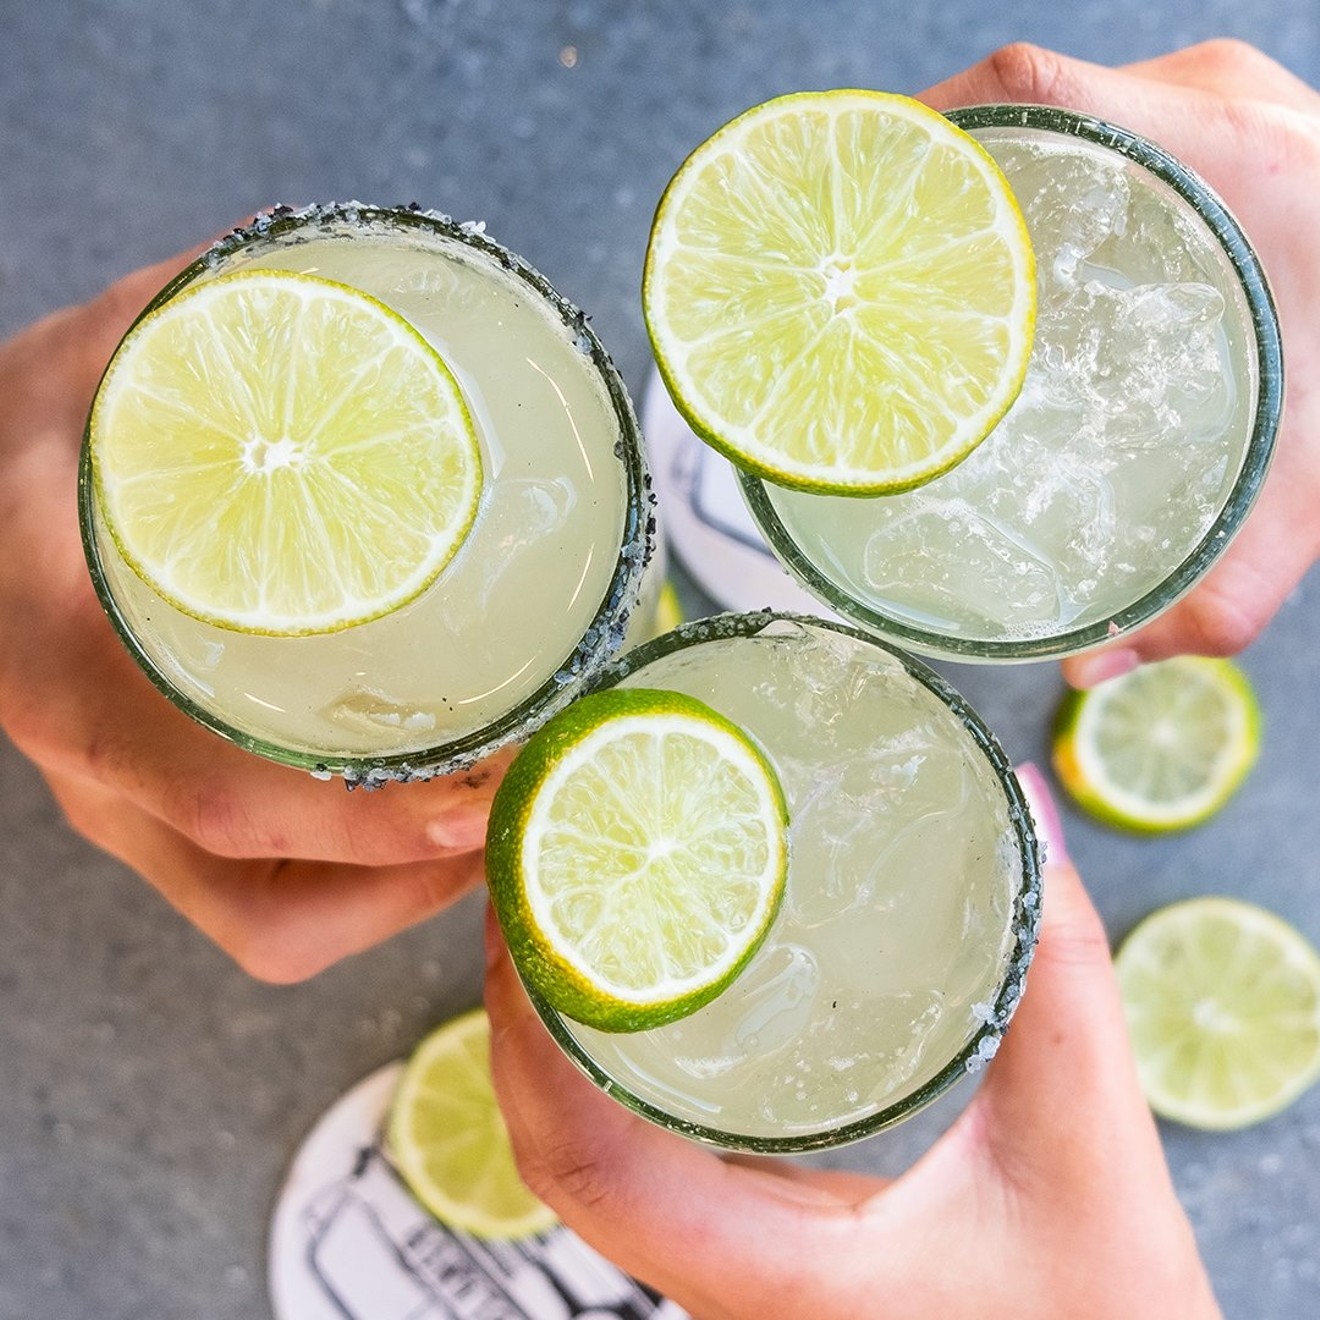 Margaritas, both classic and skinny, are $5 on Cinco de Mayo at Blanco Tacos + Tequila.